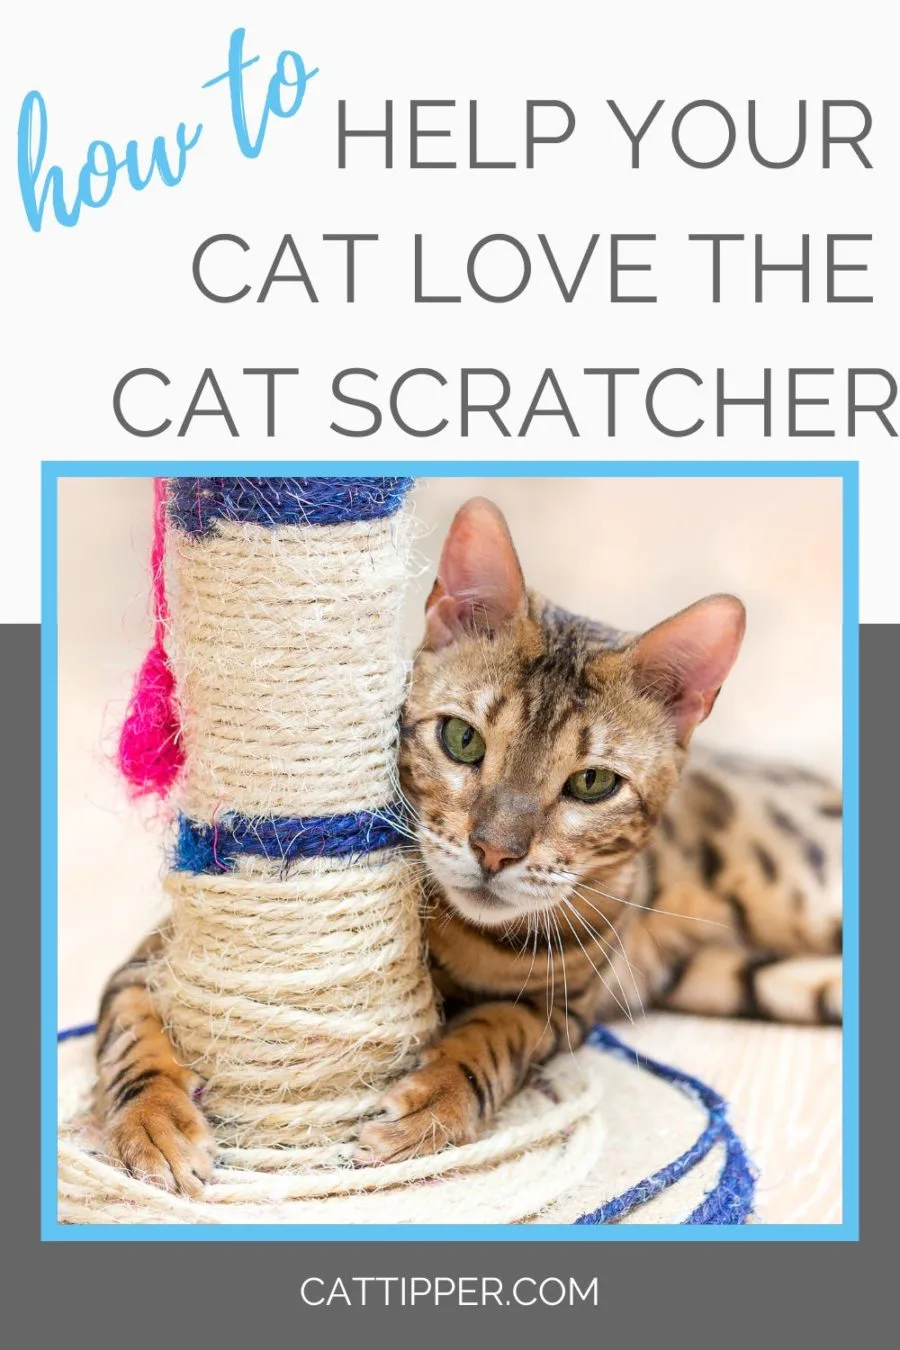 how to help your cat love the cat scratcher!